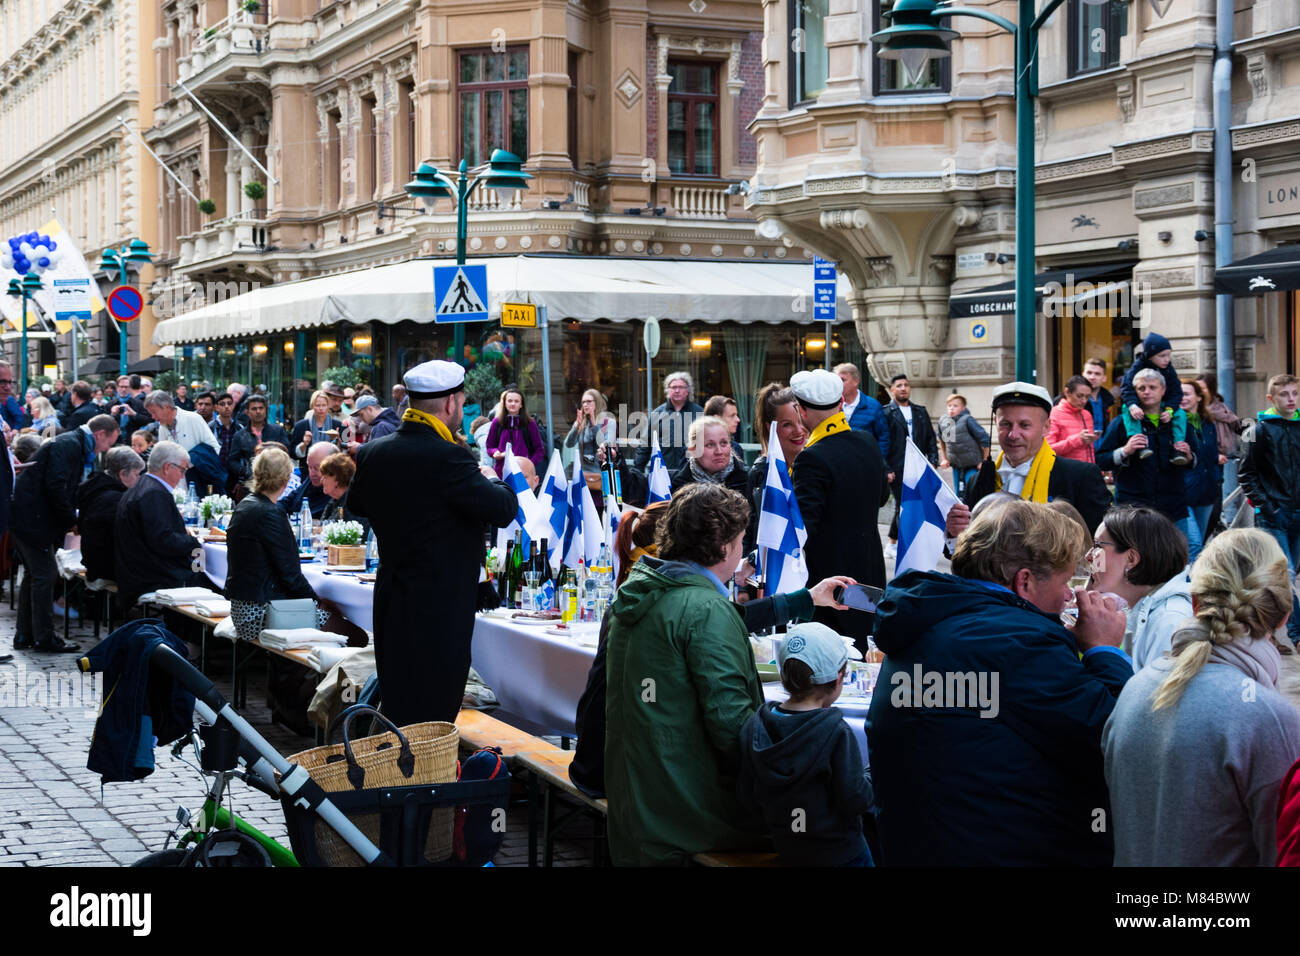 Helsinki, Finland. August 26, 2017. People celebrating the centenary year of finnish independence. Suomi Finland 100. Stock Photo